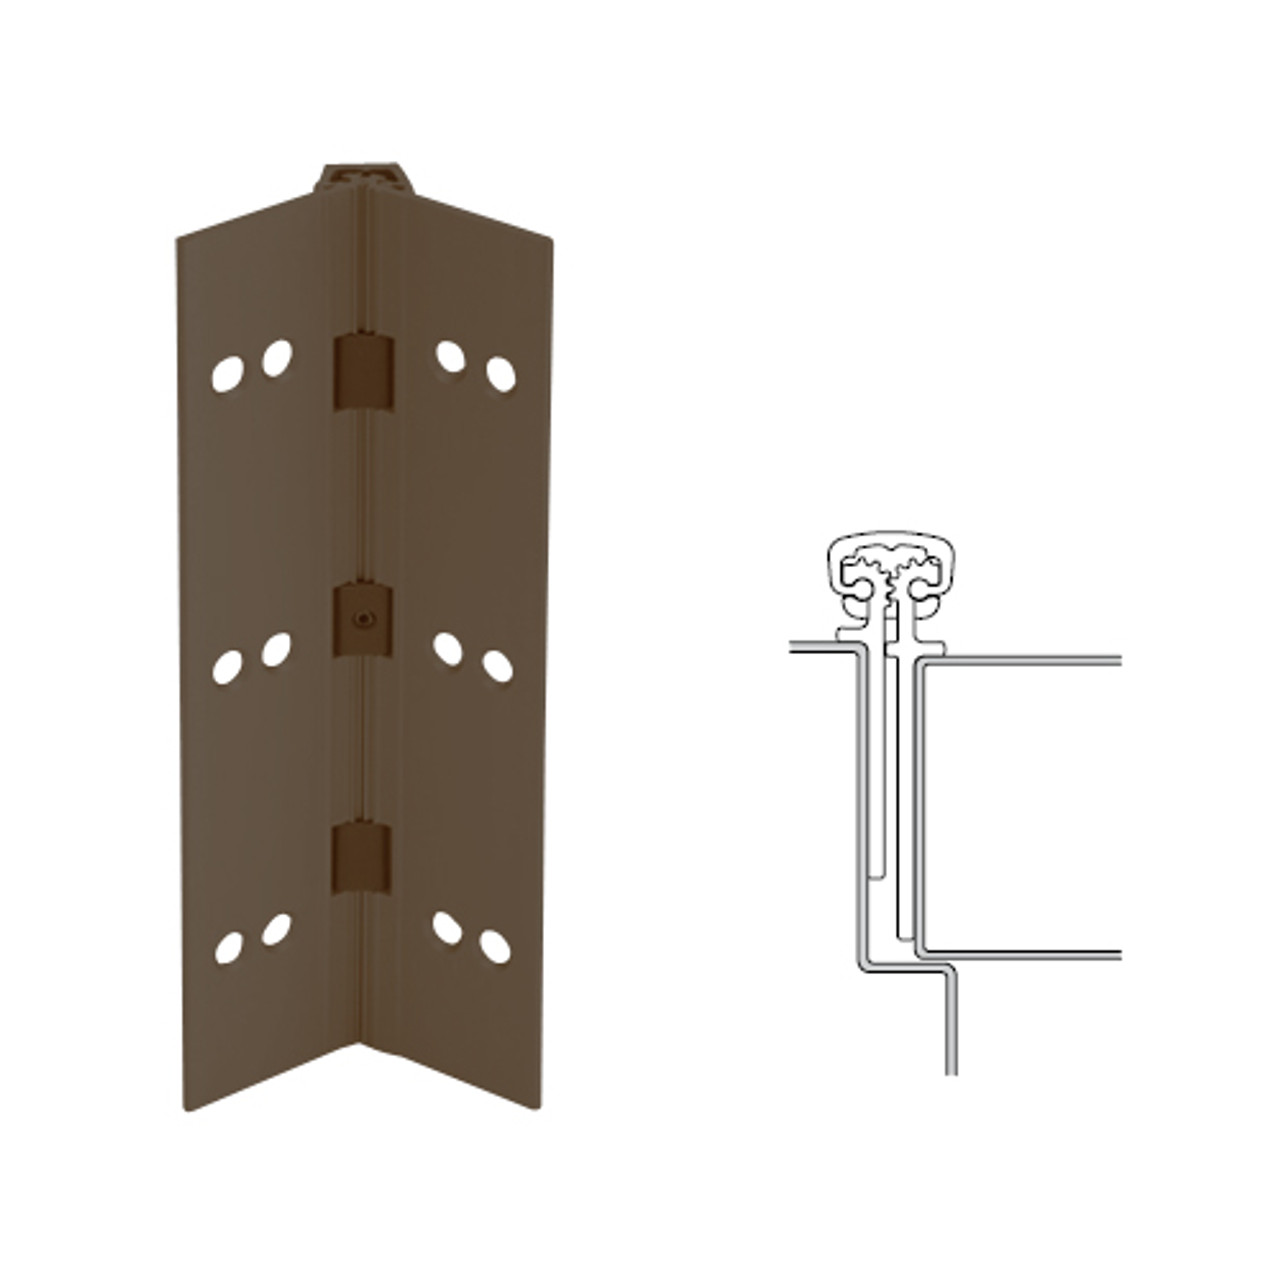 026XY-313AN-120-WD IVES Full Mortise Continuous Geared Hinges with Wood Screws in Dark Bronze Anodized